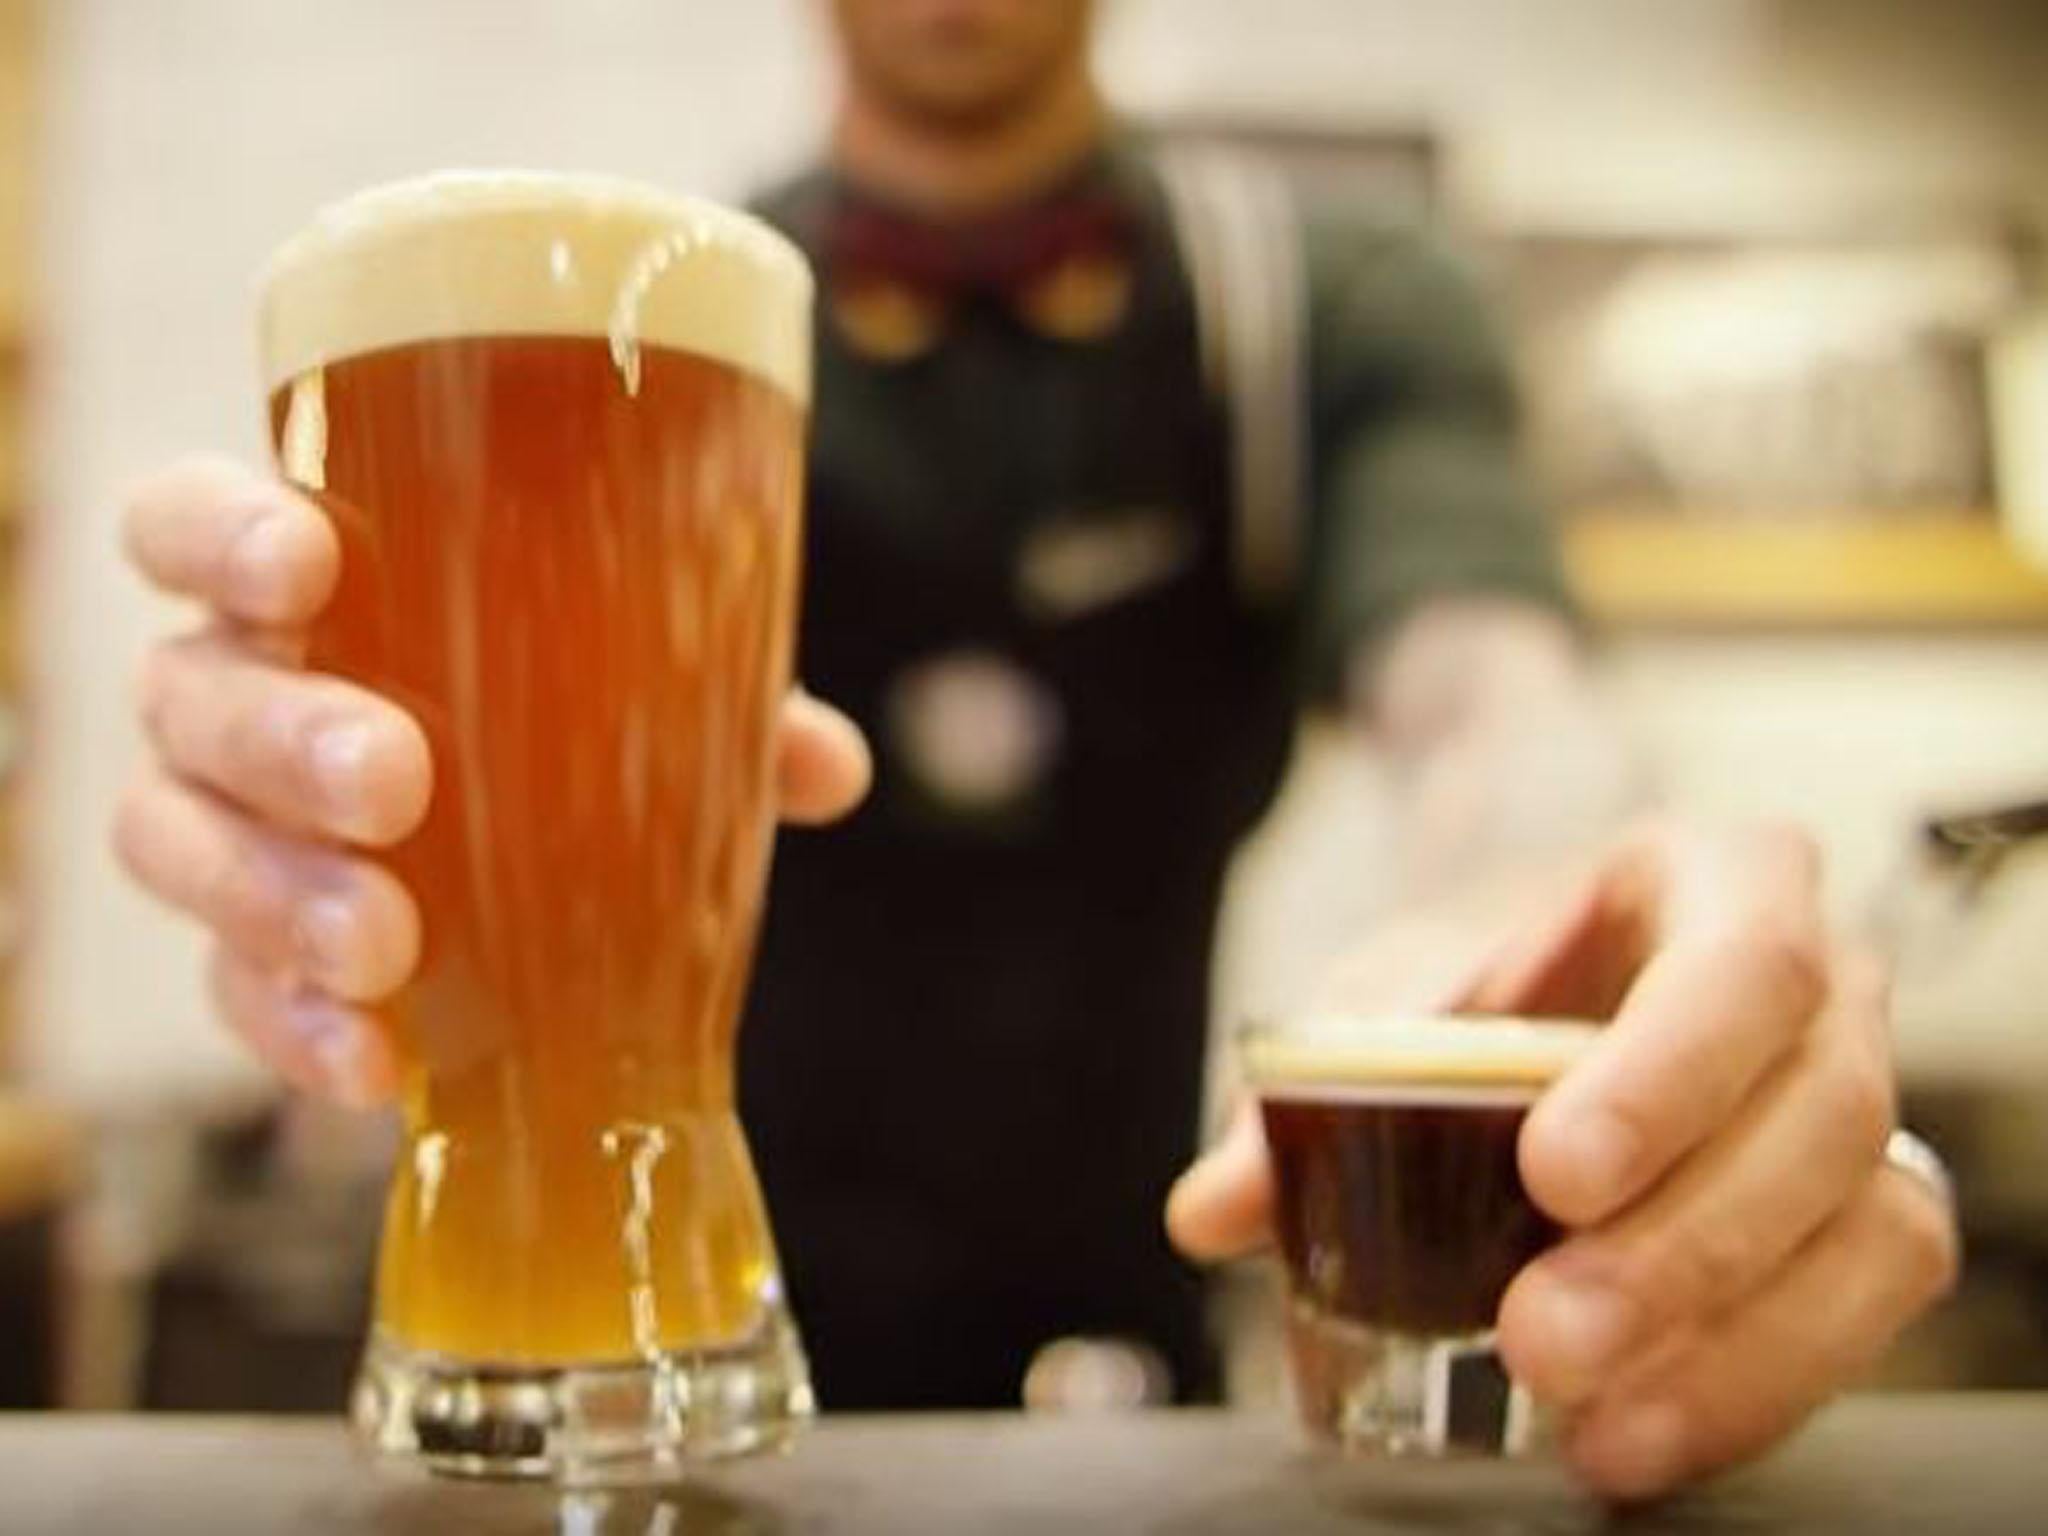 The Espresso Cloud IPA took a year for the Starbucks team to master